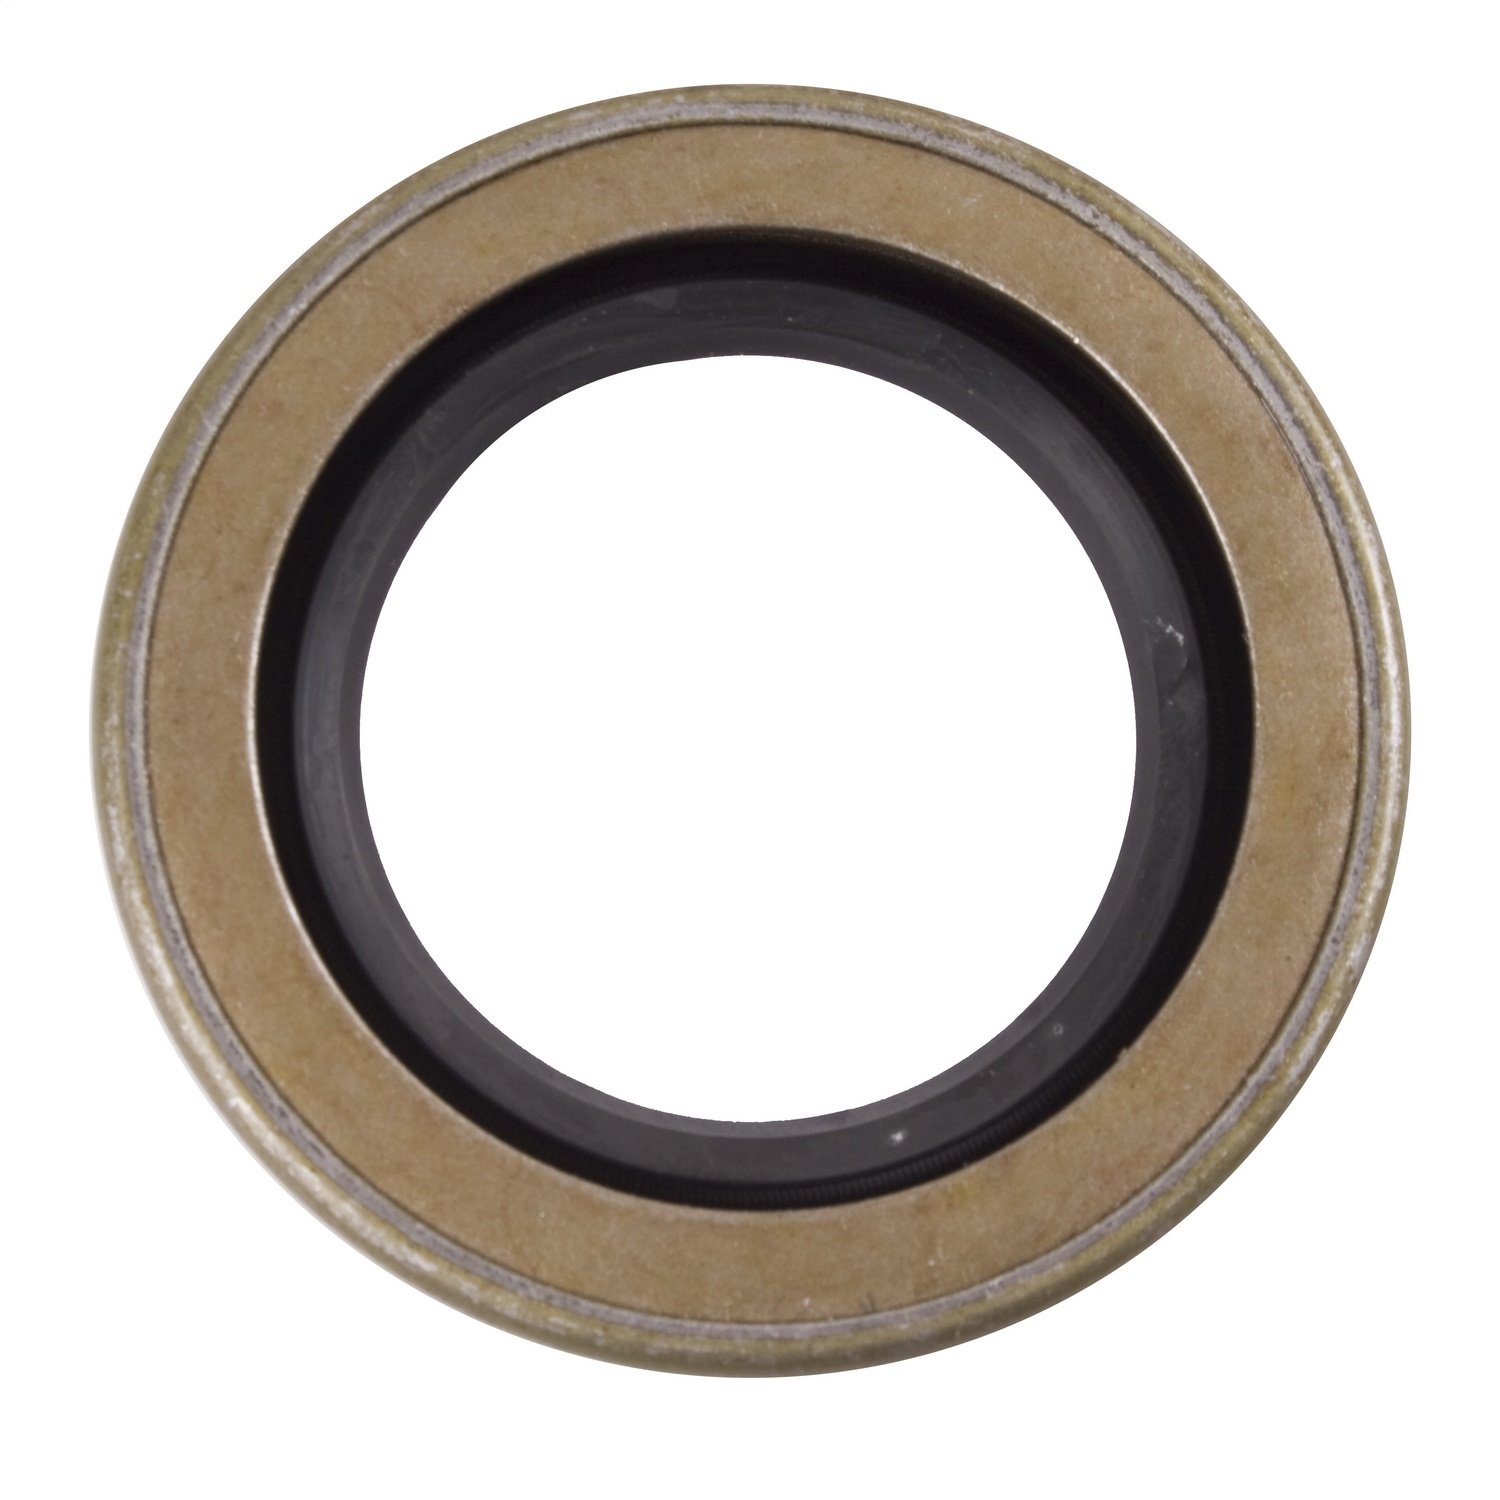 Output Shaft Seal for Dana 18 1945-1979 Willys and Jeep By Omix-ADA